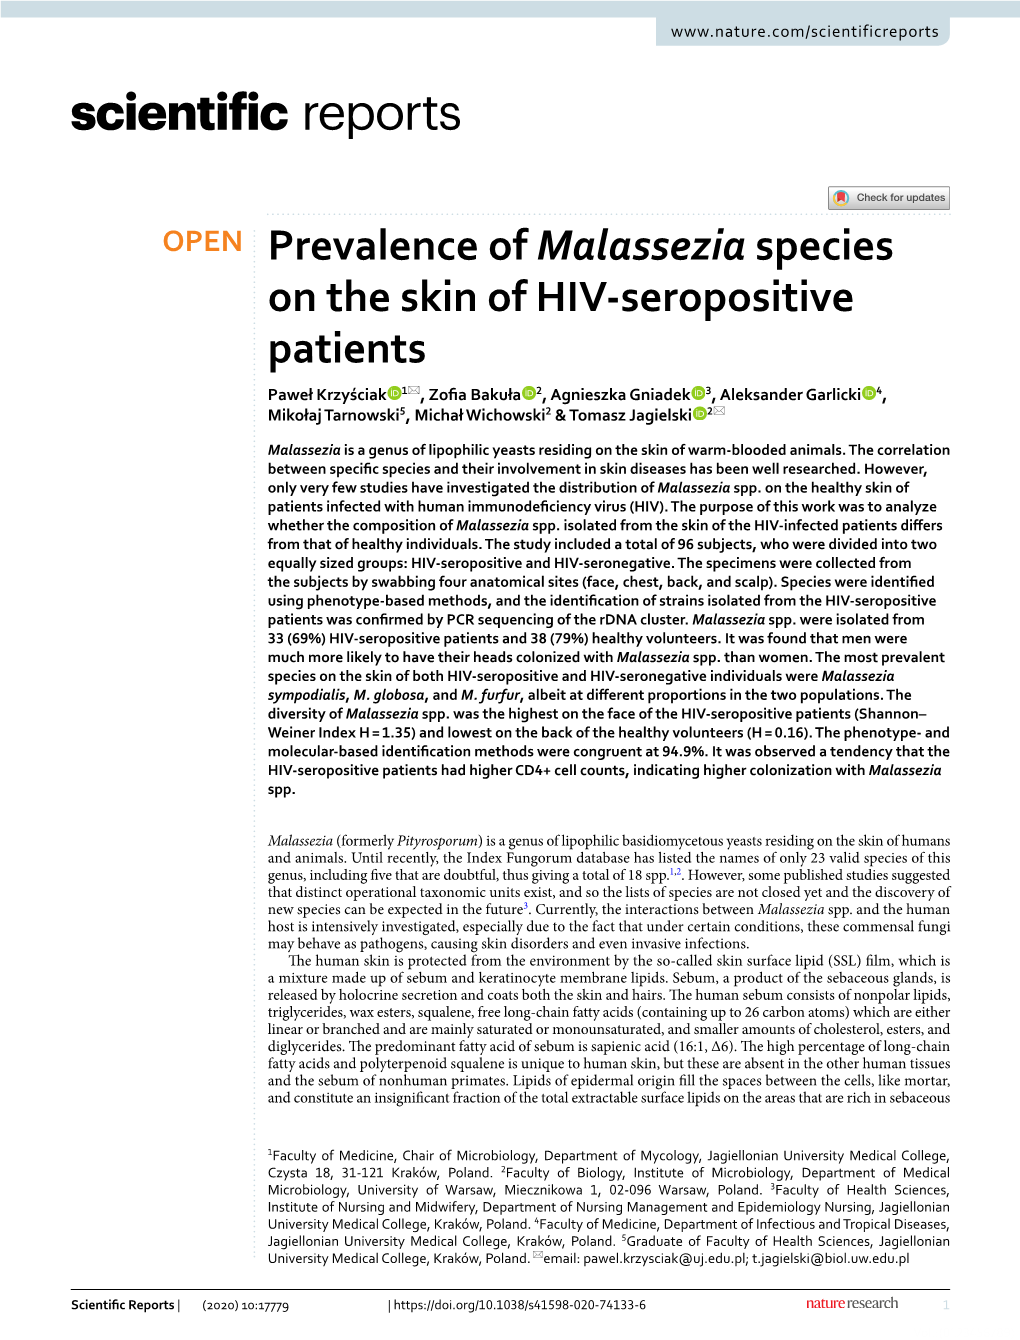 Prevalence of Malassezia Species on the Skin of HIV-Seropositive Patients